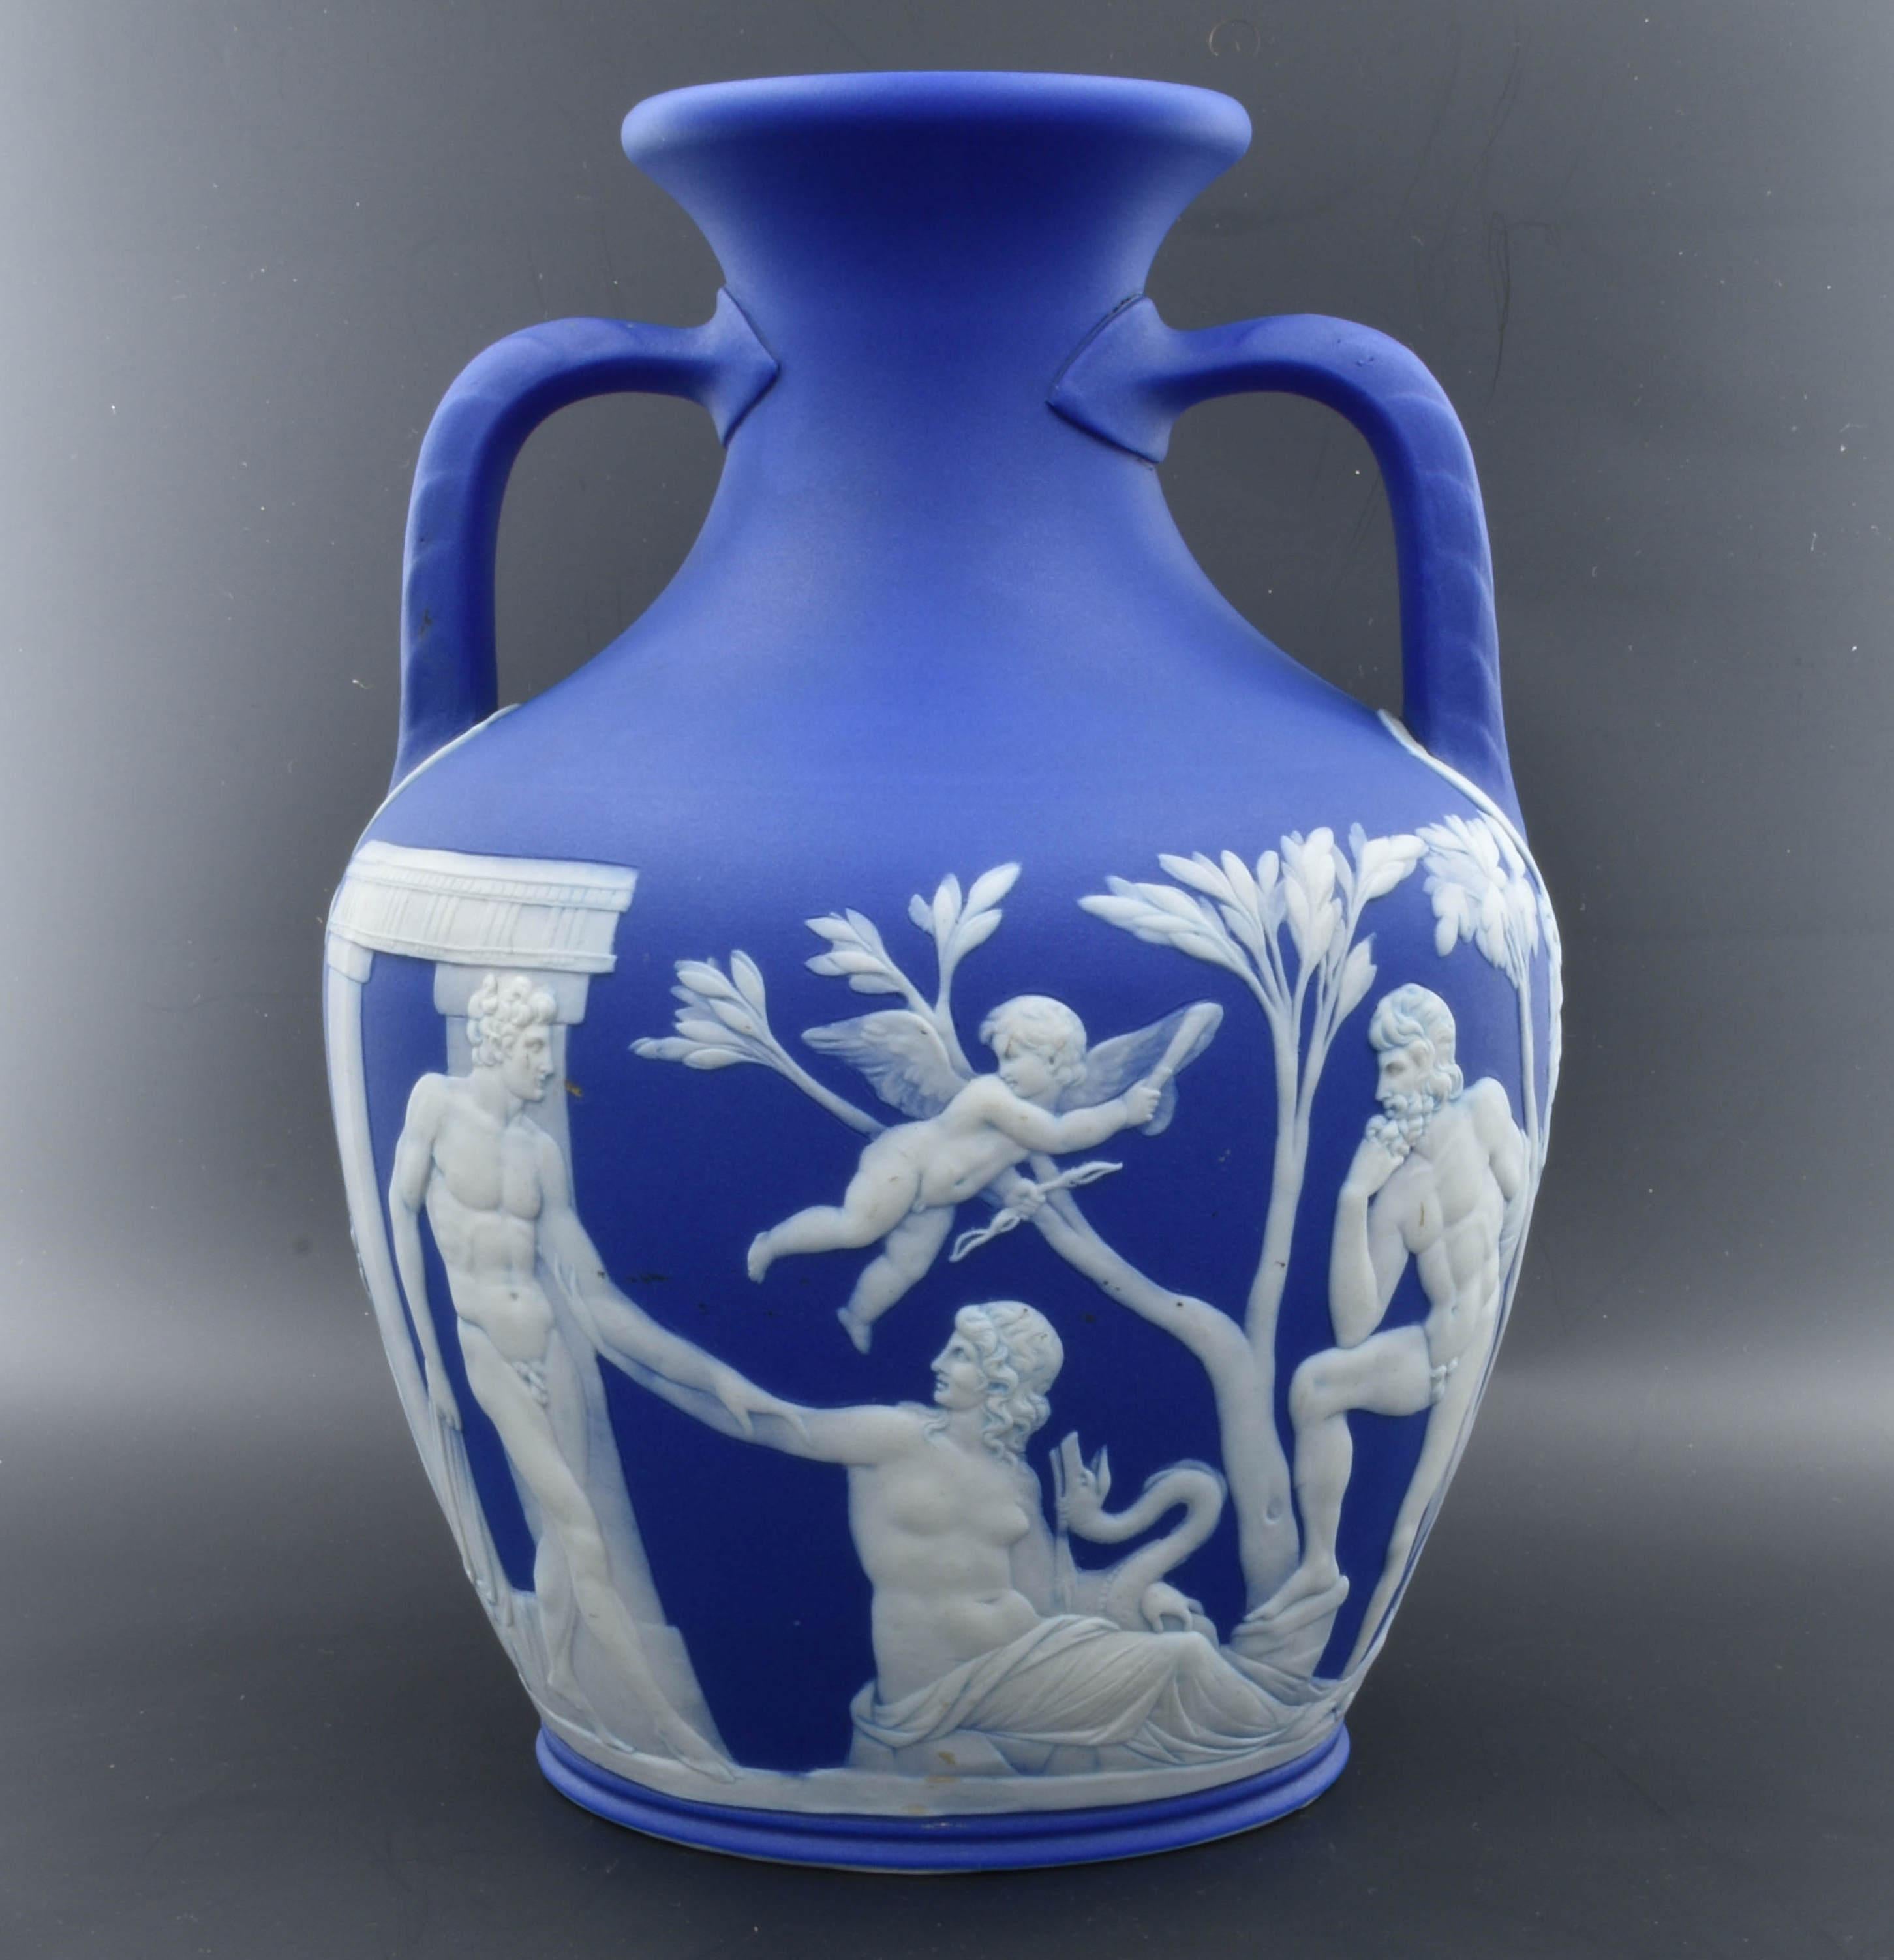 A full-sized Portland vase in cobalt jasper dip. This is the 'undraped' version, meaning it follows the original, rather than having draperies strategically placed. 

A superb example, with really good translucence. At this time, large jasper